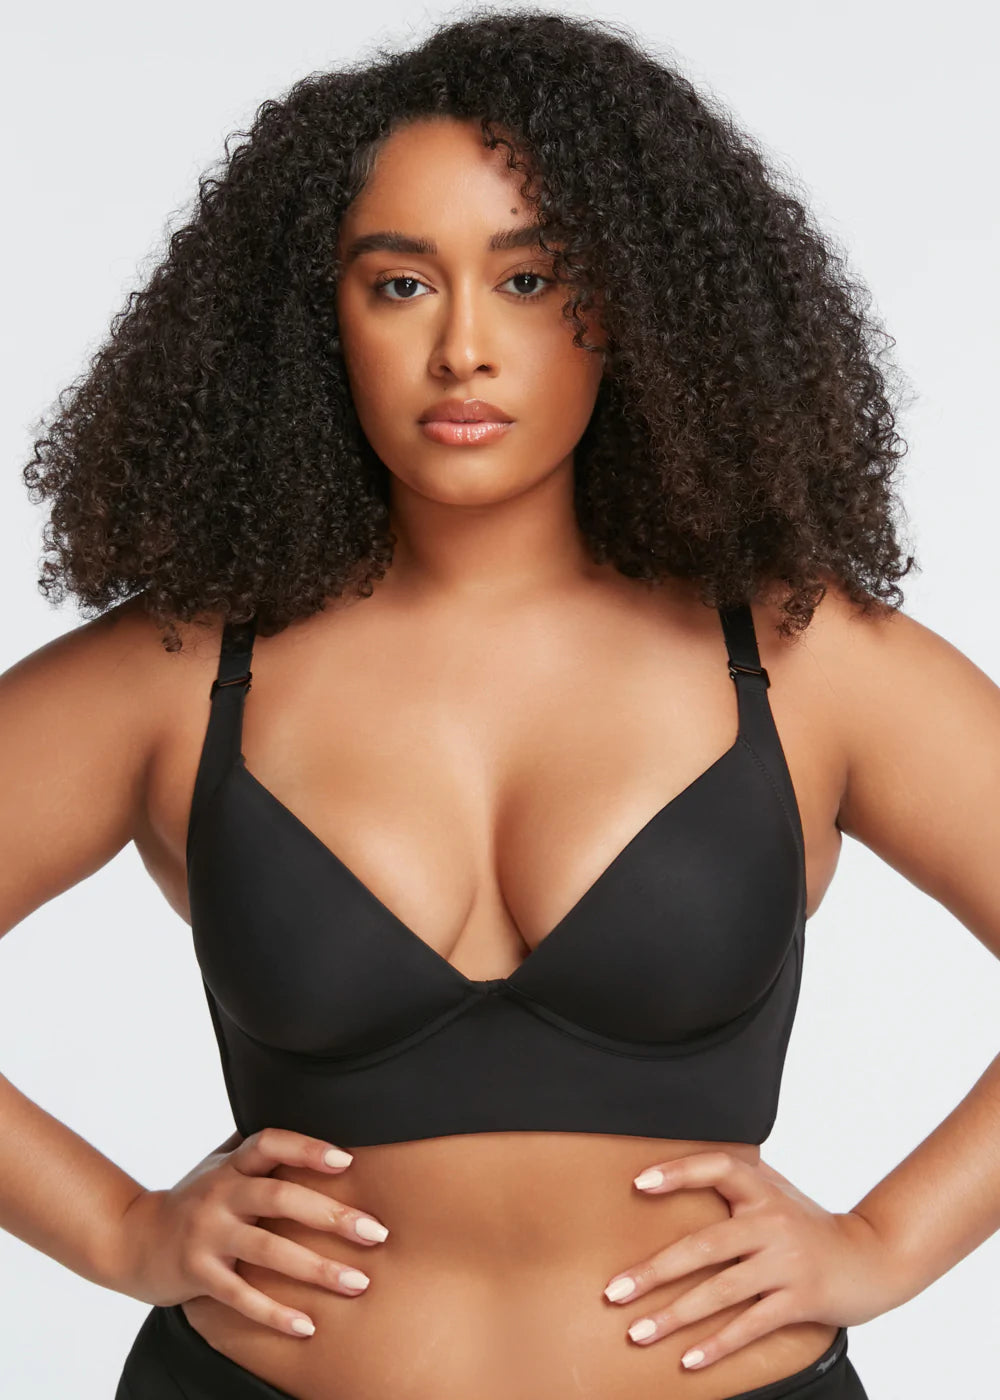 High Compression Push Up Bra  No more fat on the back – Fajas Colombianas  Sale